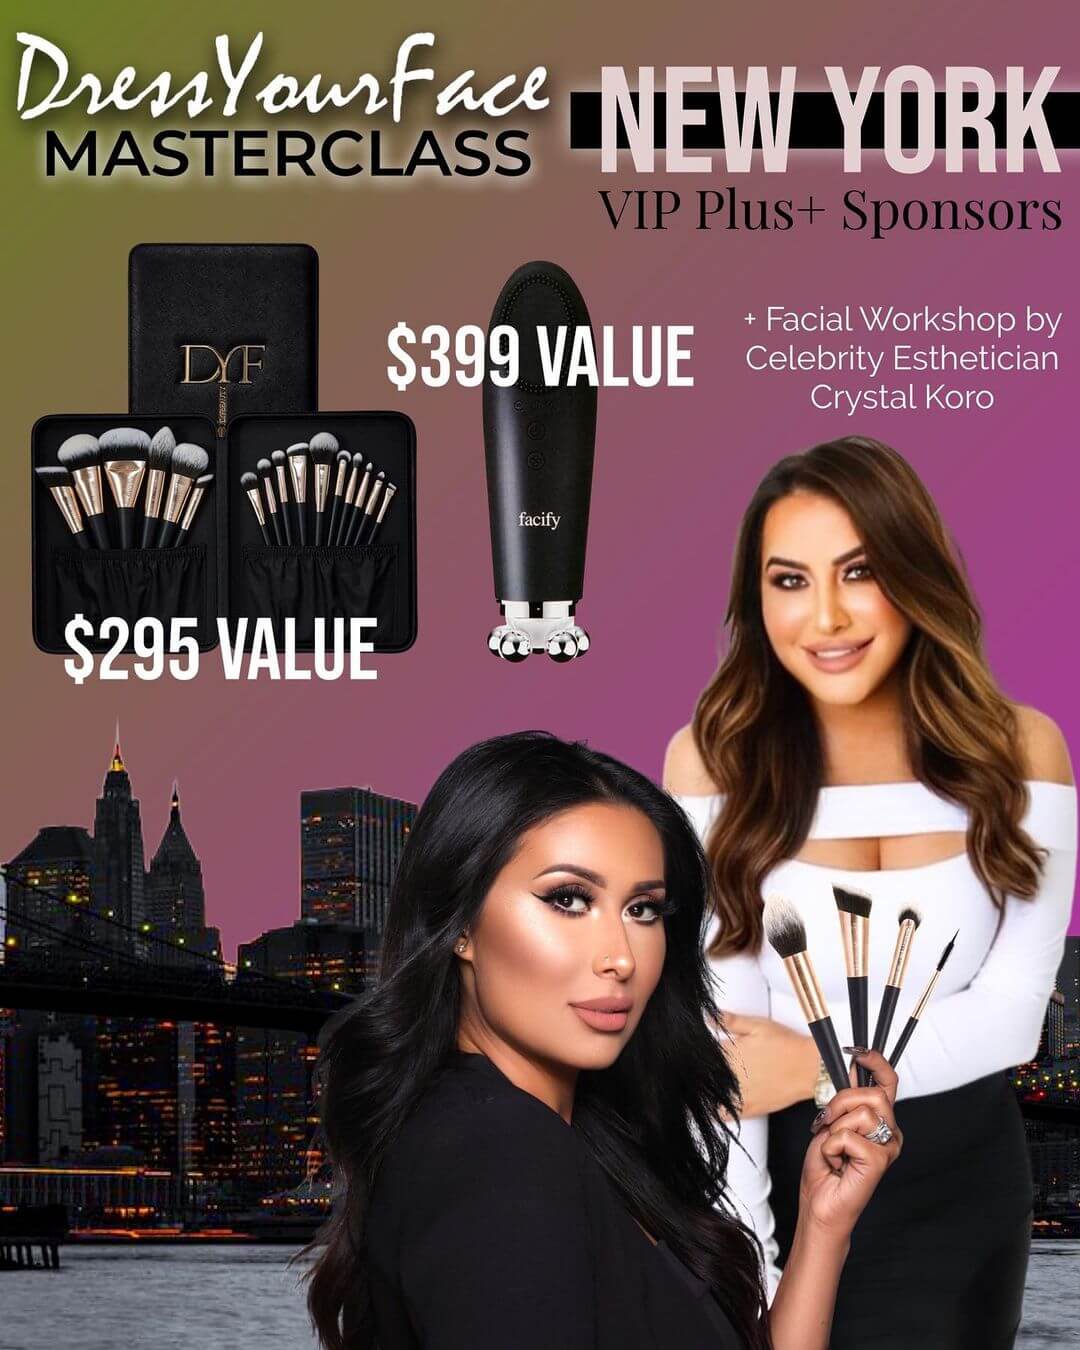 Event Alert: Catch Tamanna Roashan In New York For Her Latest Dress Your Face Masterclass: